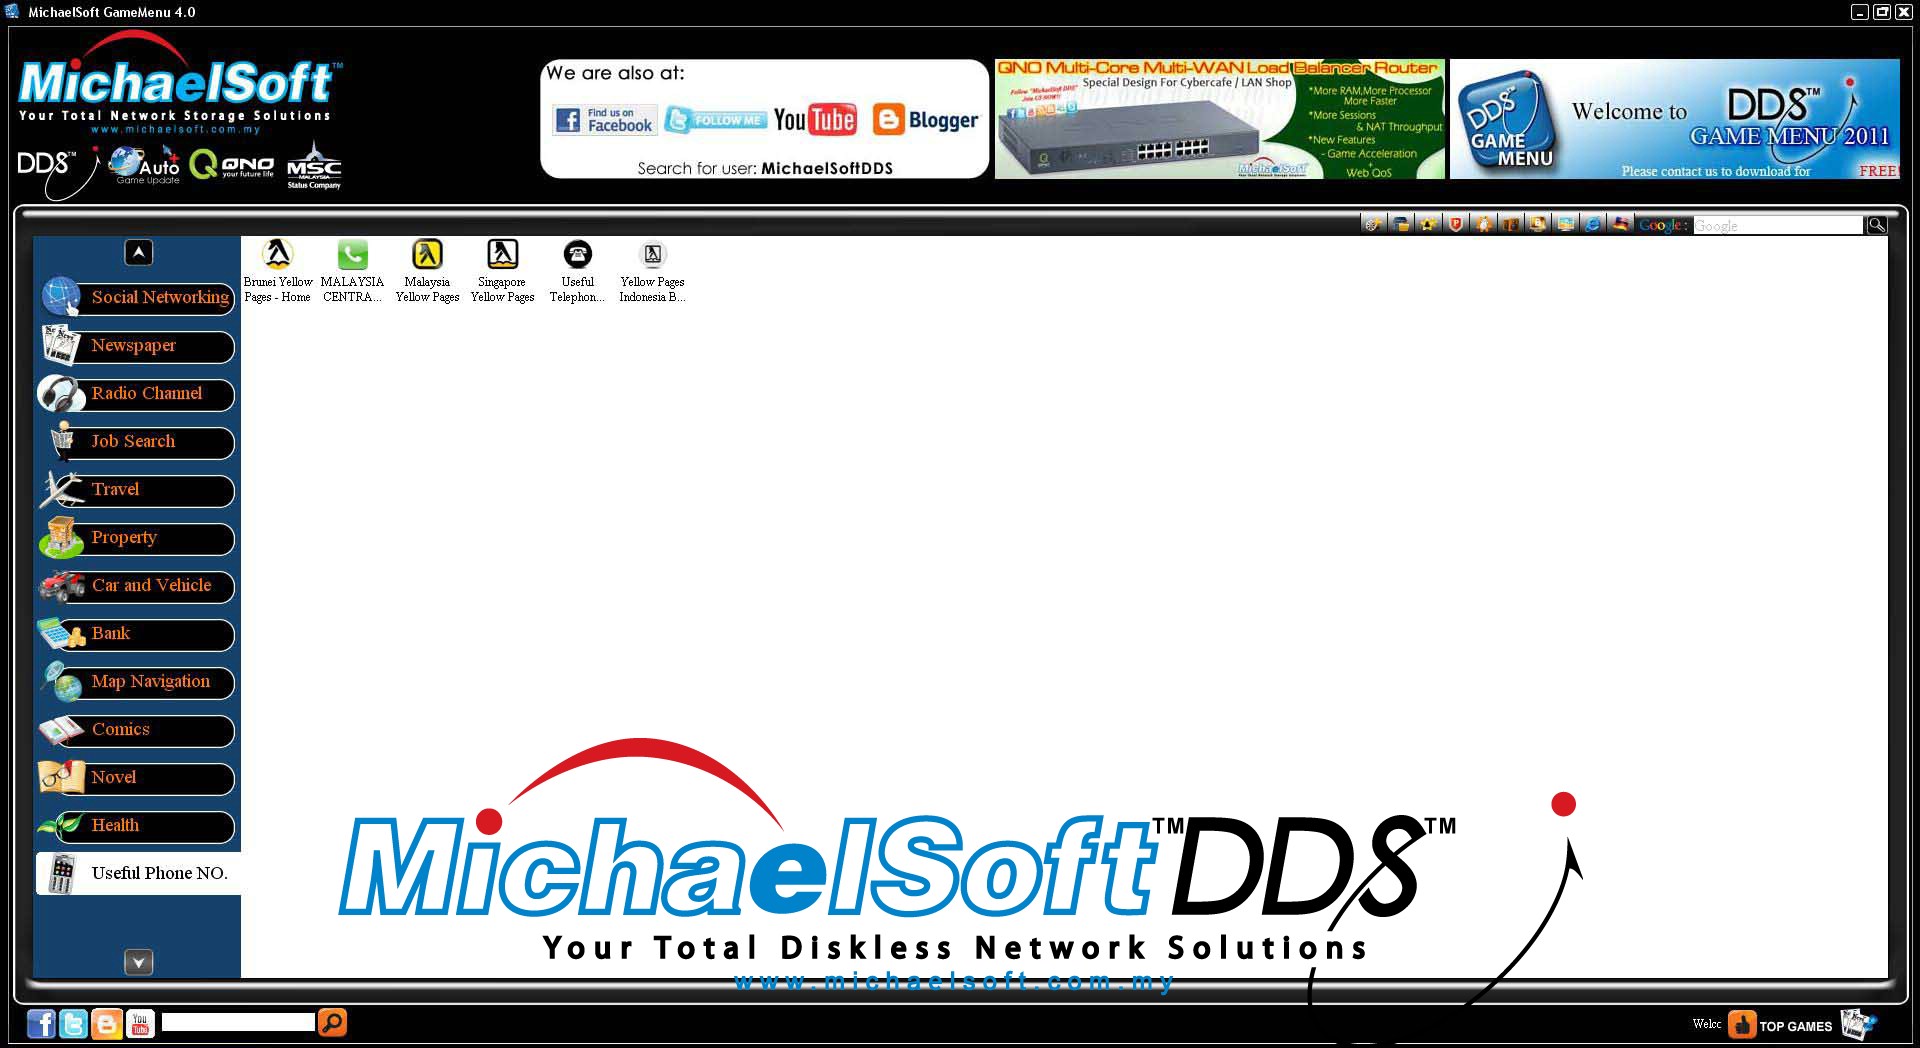 Michaelsoft DDS Diskless Solution , Cloud Computing , Diskless Cybercafe , Diskless System , Michaelsoft DDS Cybercafe Game Menu (Useful Phone No)-You can get government departments, police stations, fire stations aswell as hospital contact numbers and so on.